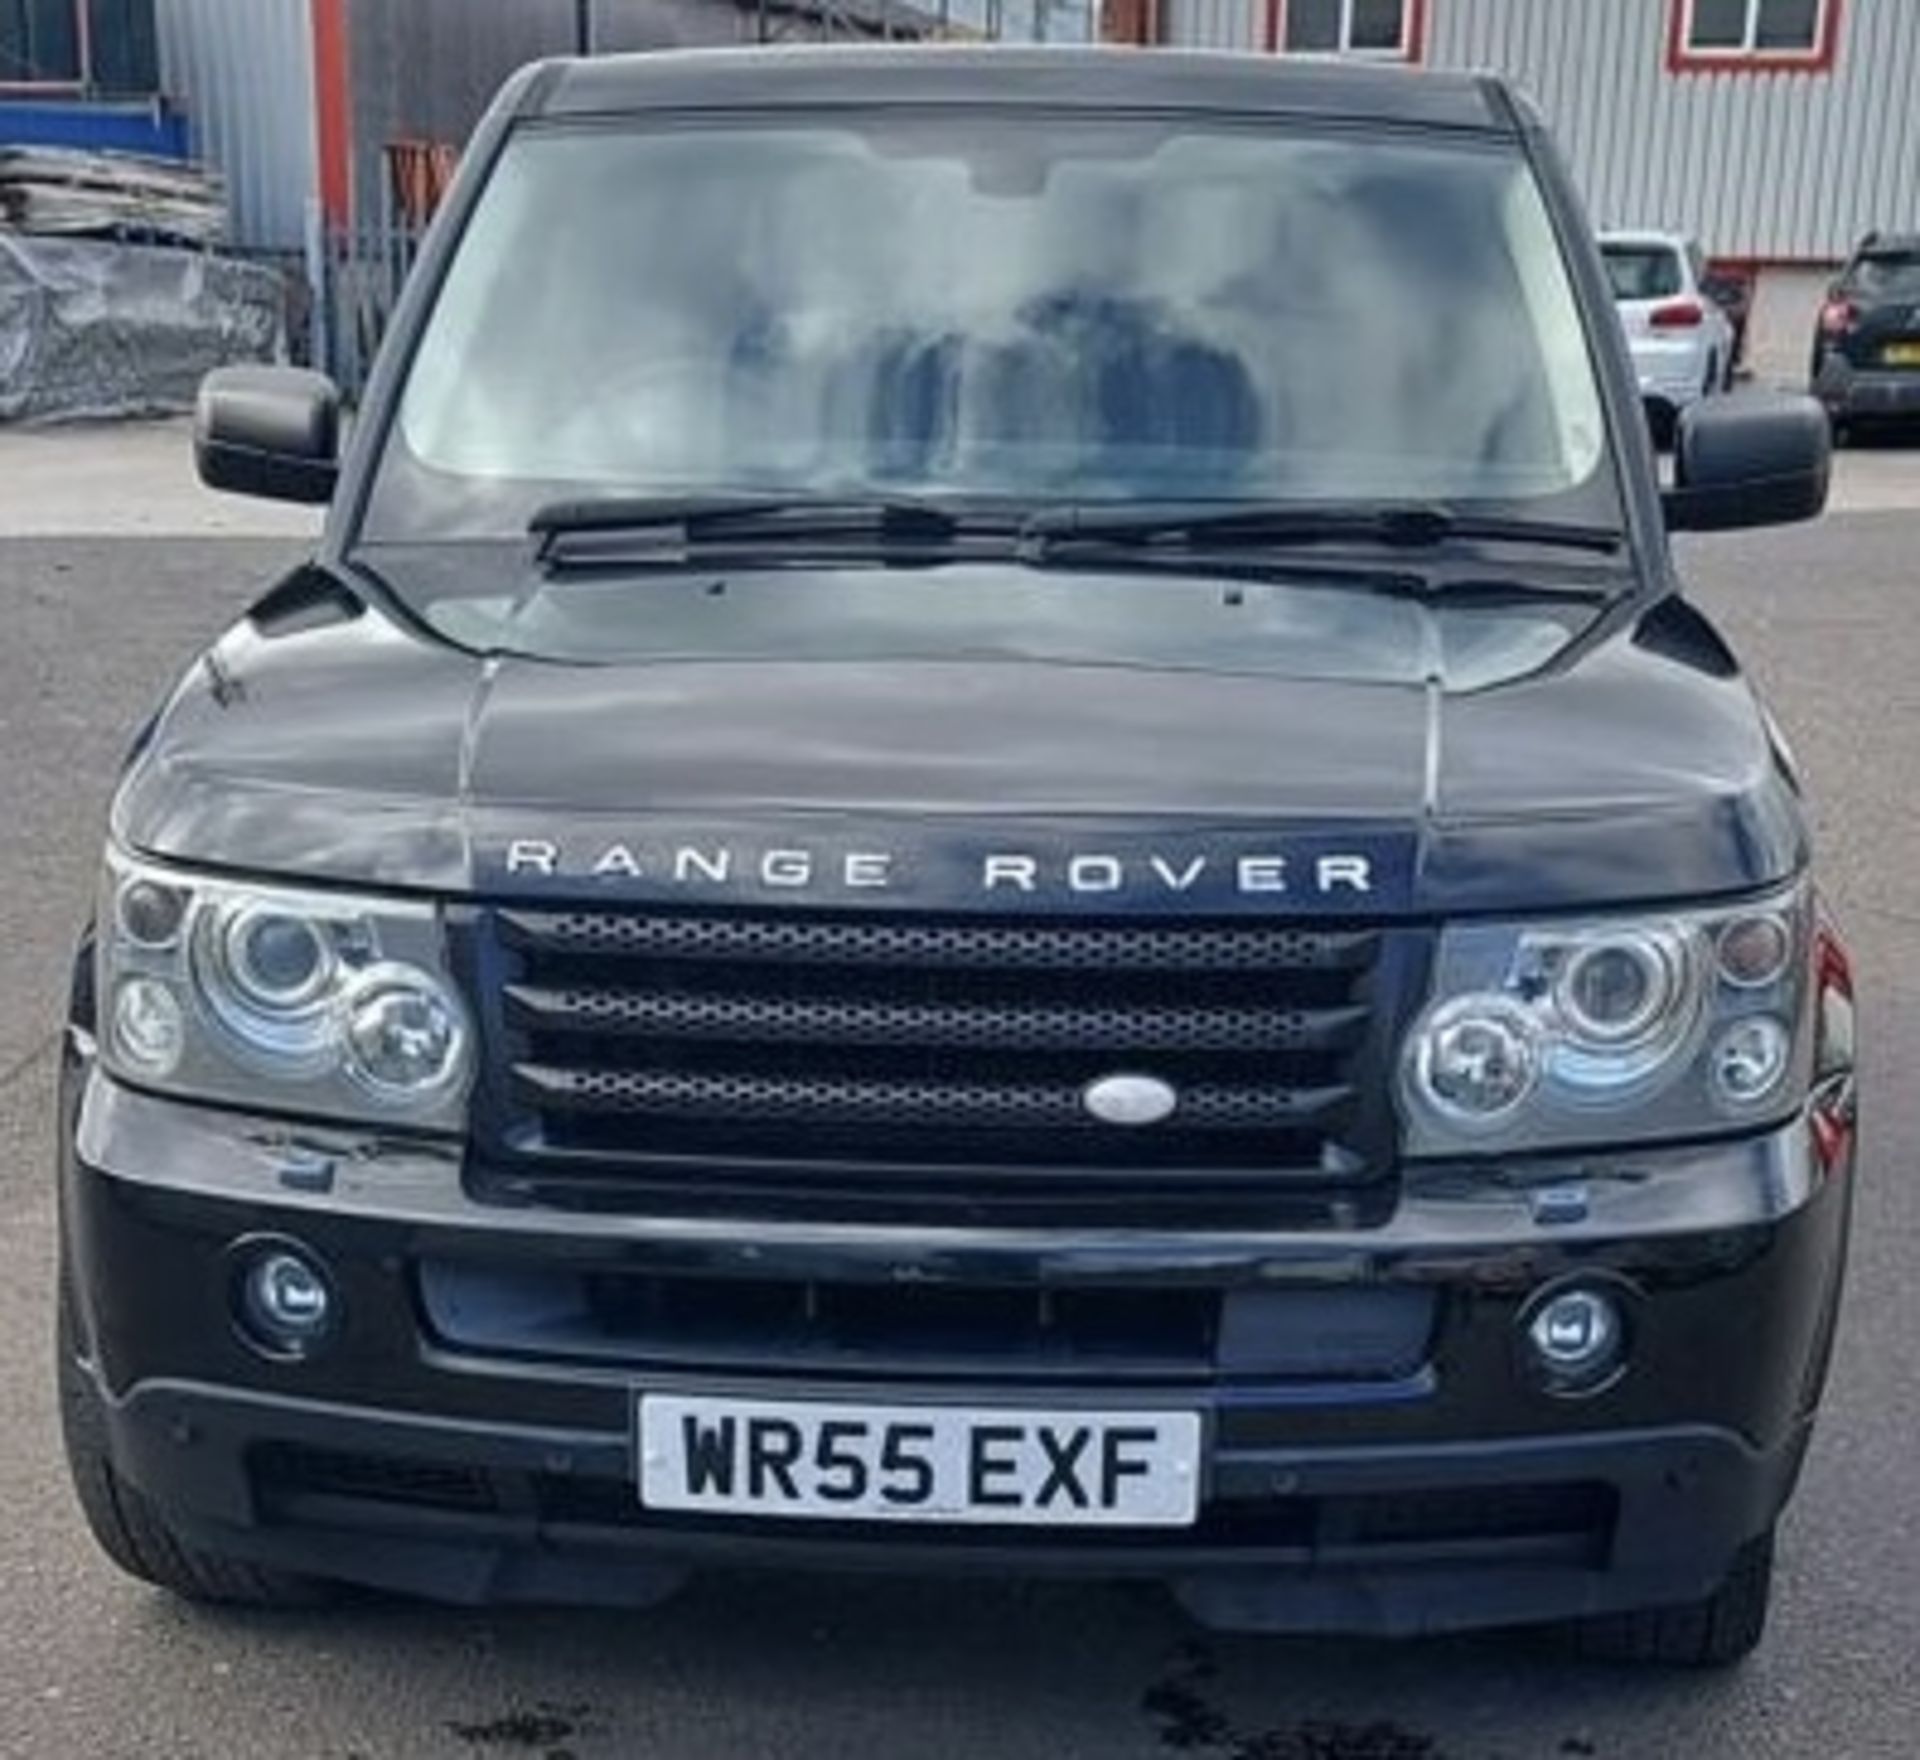 RANGE ROVER SPORT 4.2L V8 SUPERCHARGED - LATE ENTRY!